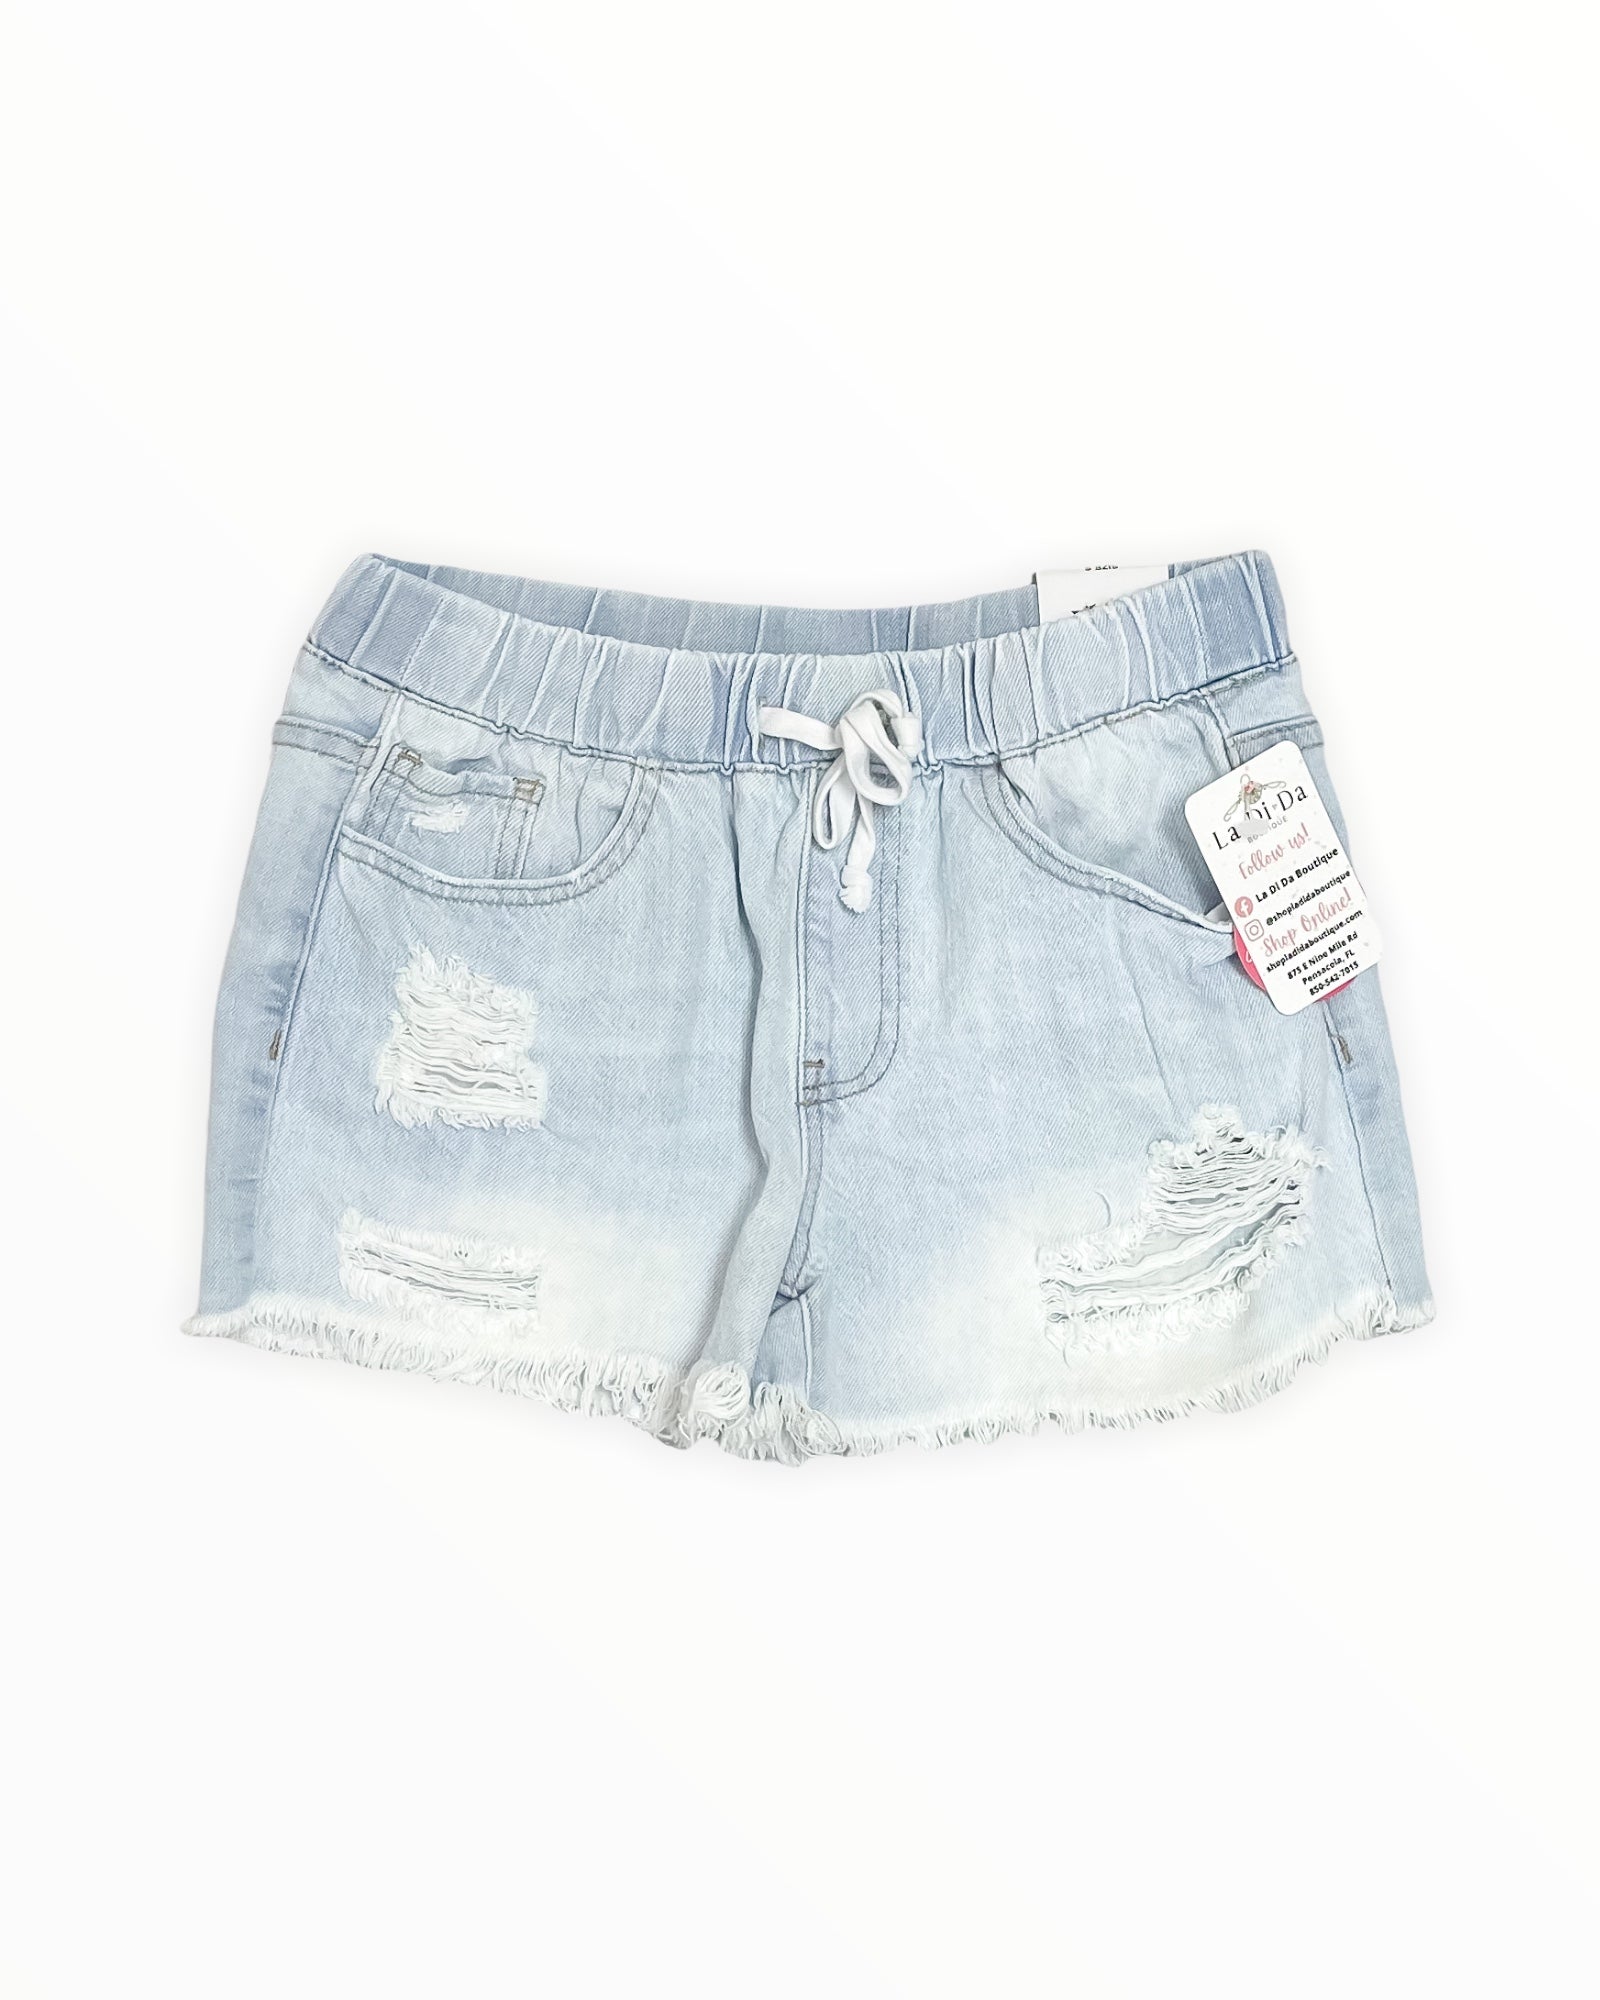 Your Favorite Distressed Shorts, Light Wash